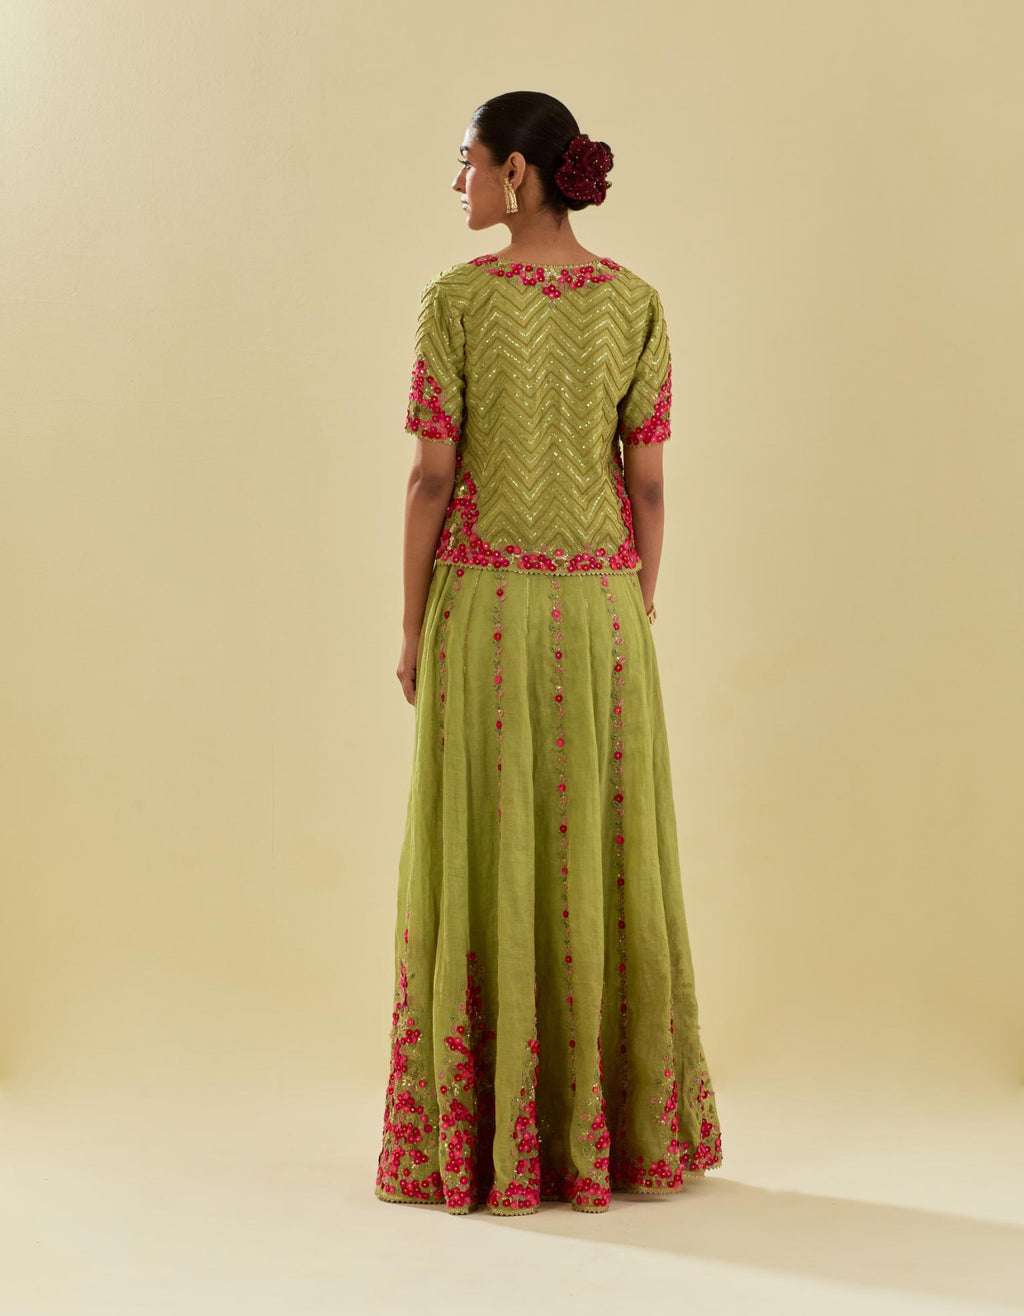 Green tissue chanderi short top set with delicate hand cut silk flower embroidery, highlighted with gold sequins and beads.